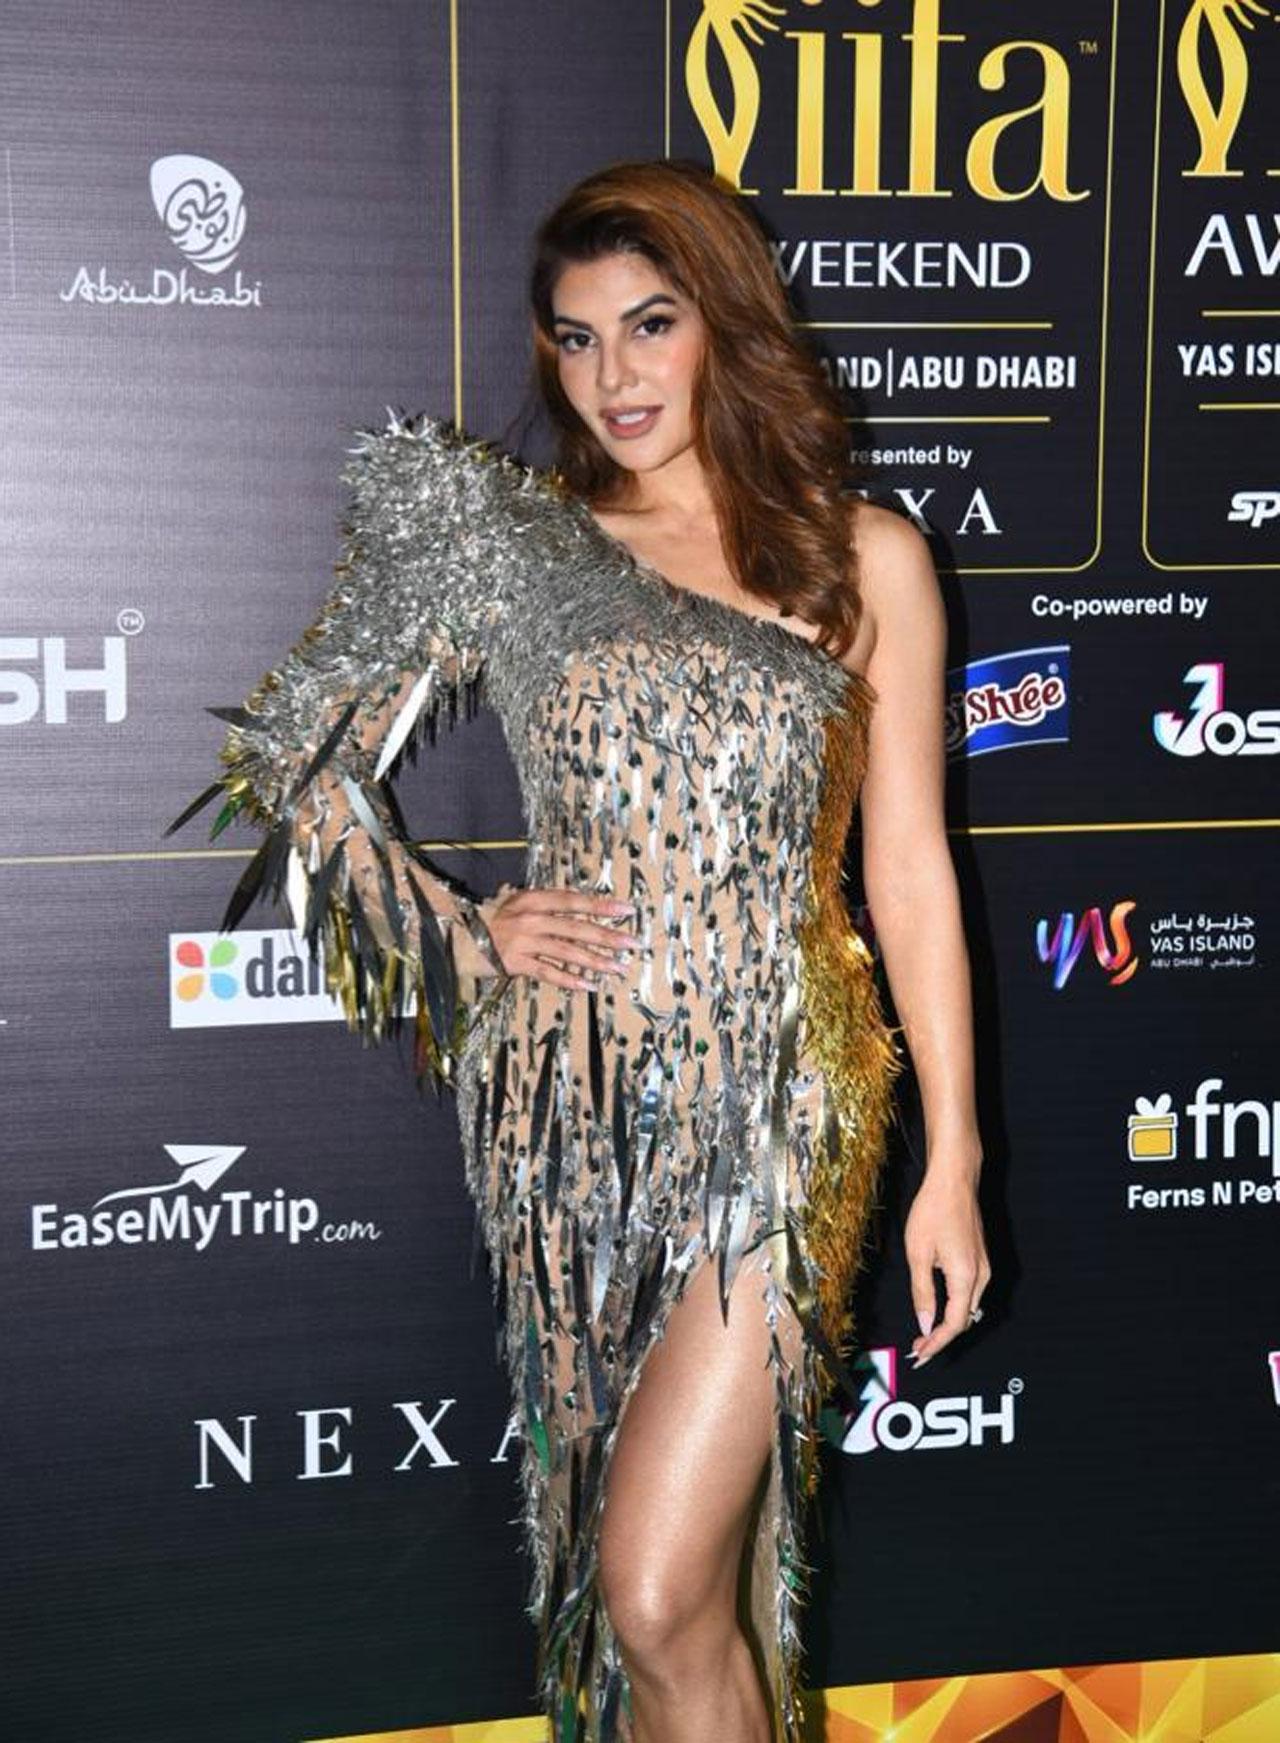 Jacqueline Fernandez shone in her shimmery golden and silver dress and nailed the green carpet appearance with her smoldering looks. Last seen in Attack- Part 1, she now has CirKus, Kick 2, Vikrant Rona, and Ram Setu coming up